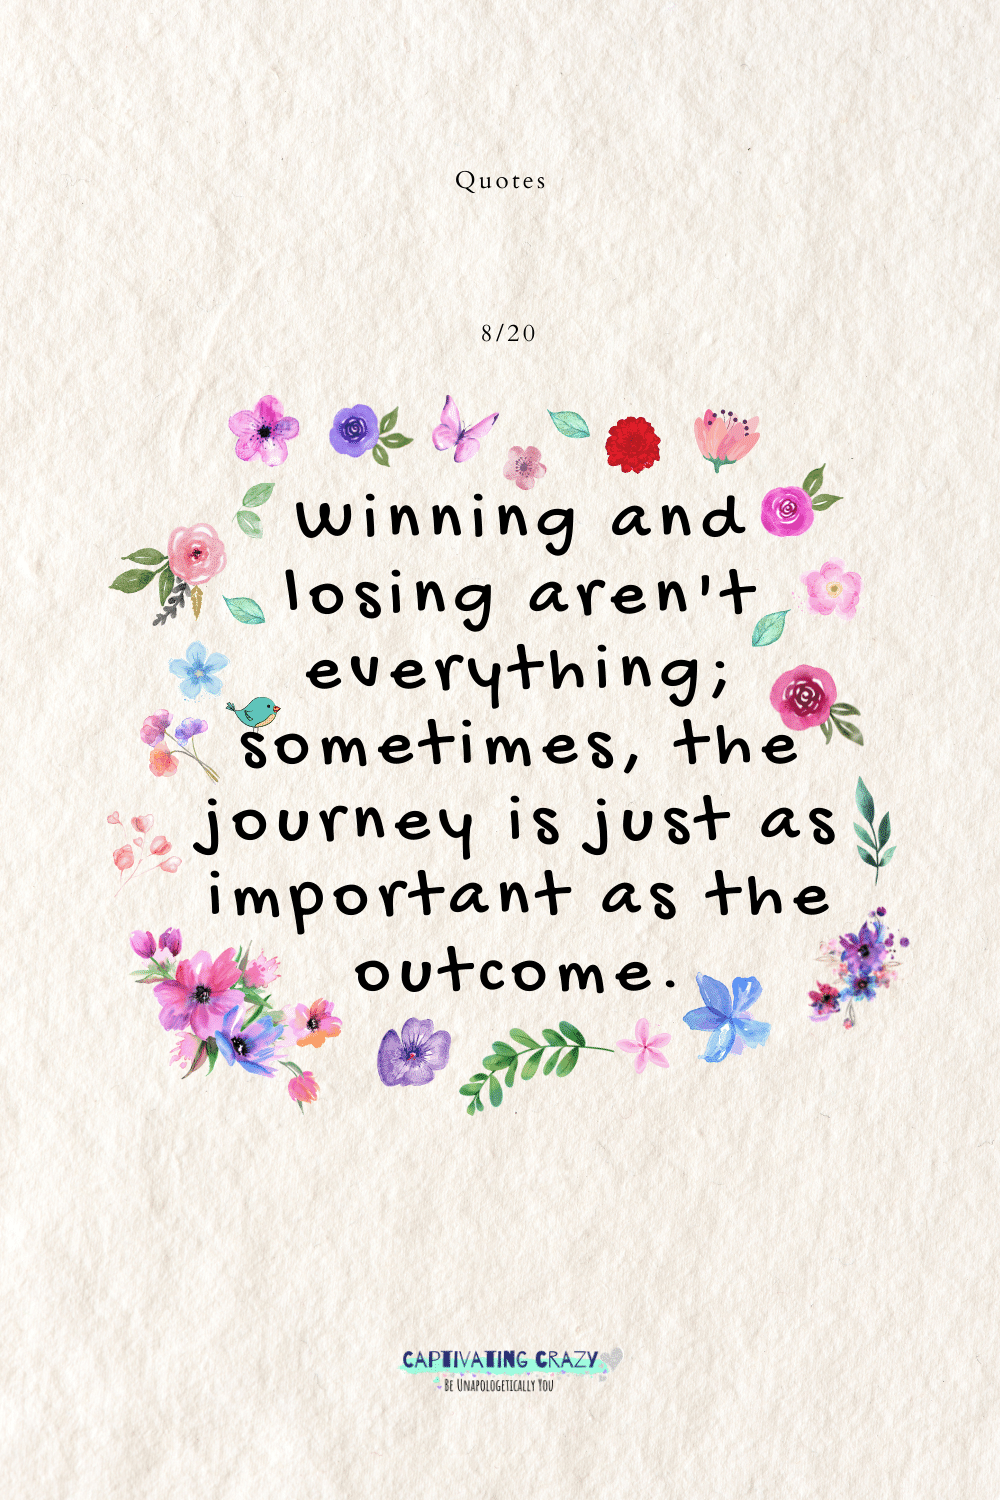 Winning and losing aren't everything. Sometimes, the journey is just as important as the outcome.